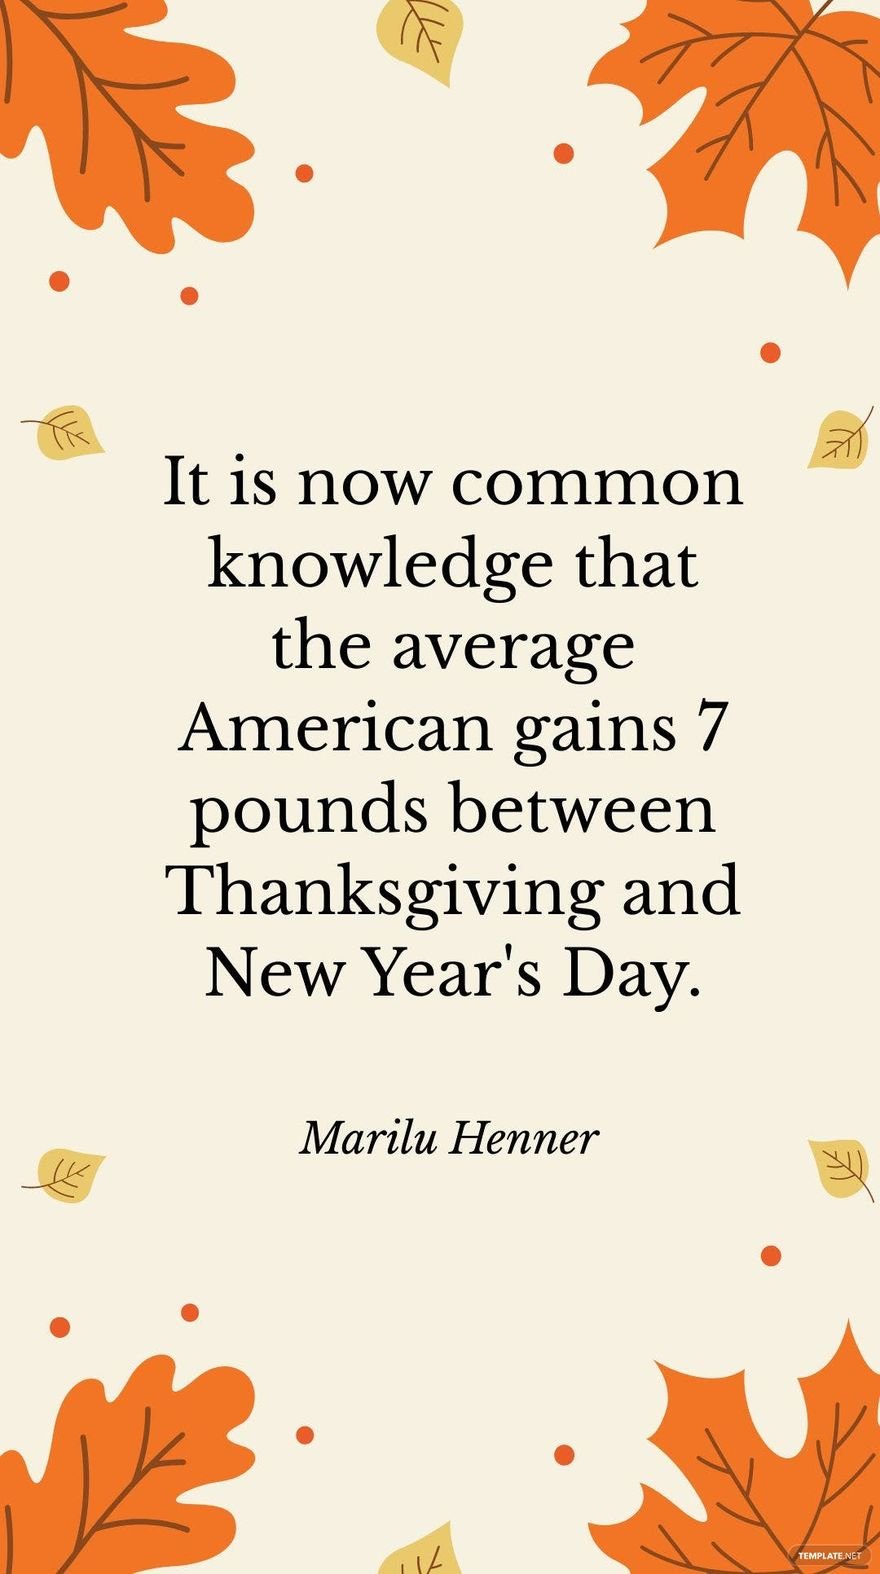 Free Marilu Henner - It is now common knowledge that the average American gains 7 pounds between Thanksgiving and New Year's Day. in JPG